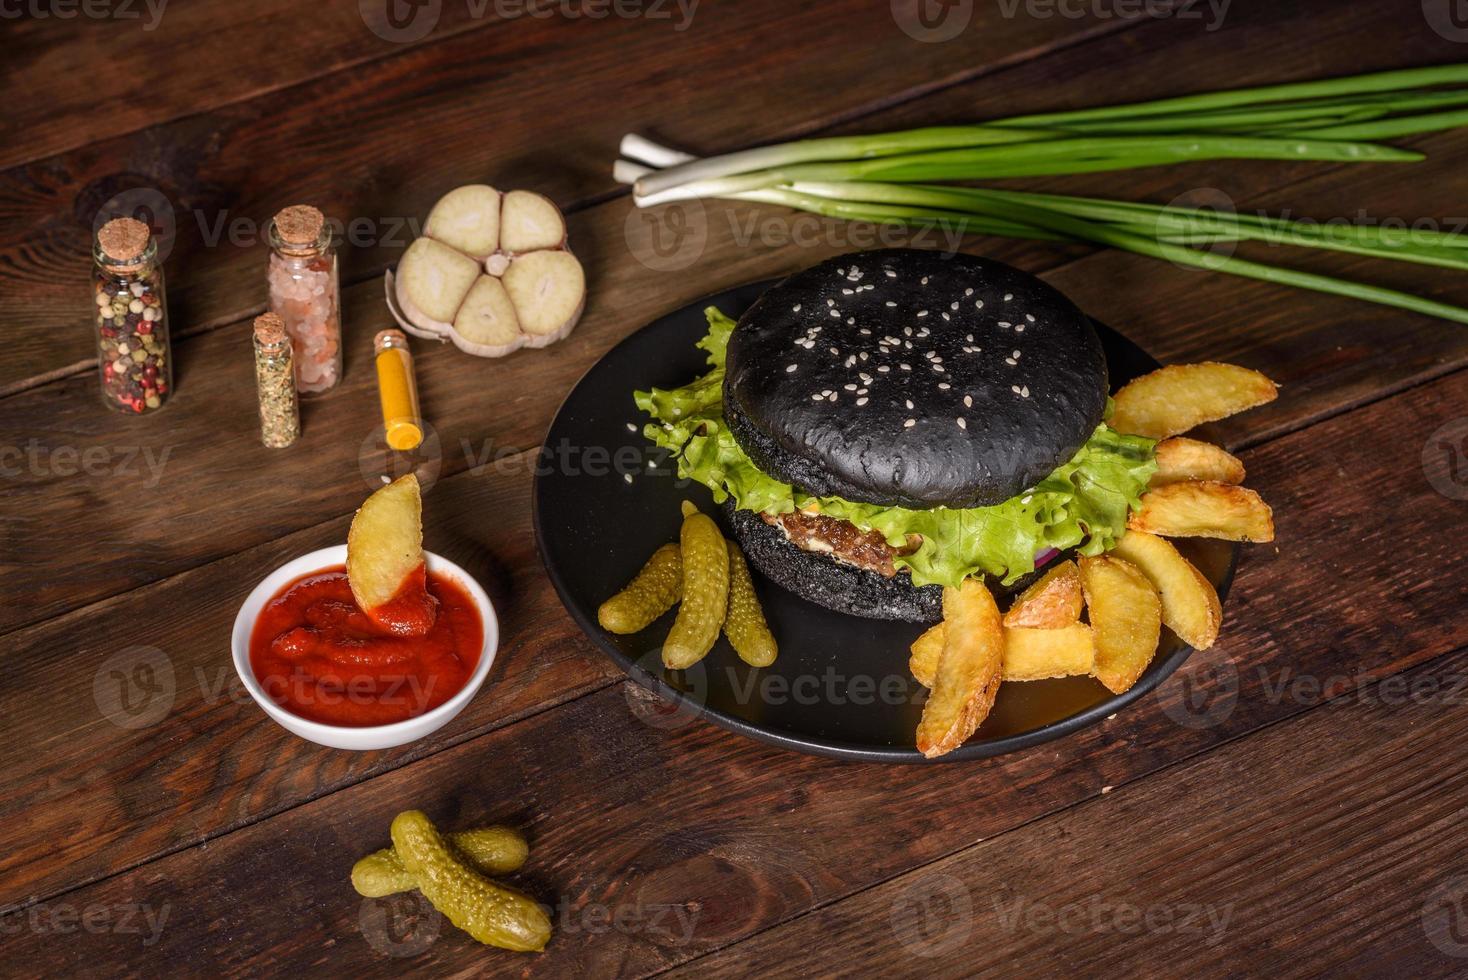 Tasty grilled homemade burger with beef, tomato, cheese, cucumber and lettuce photo